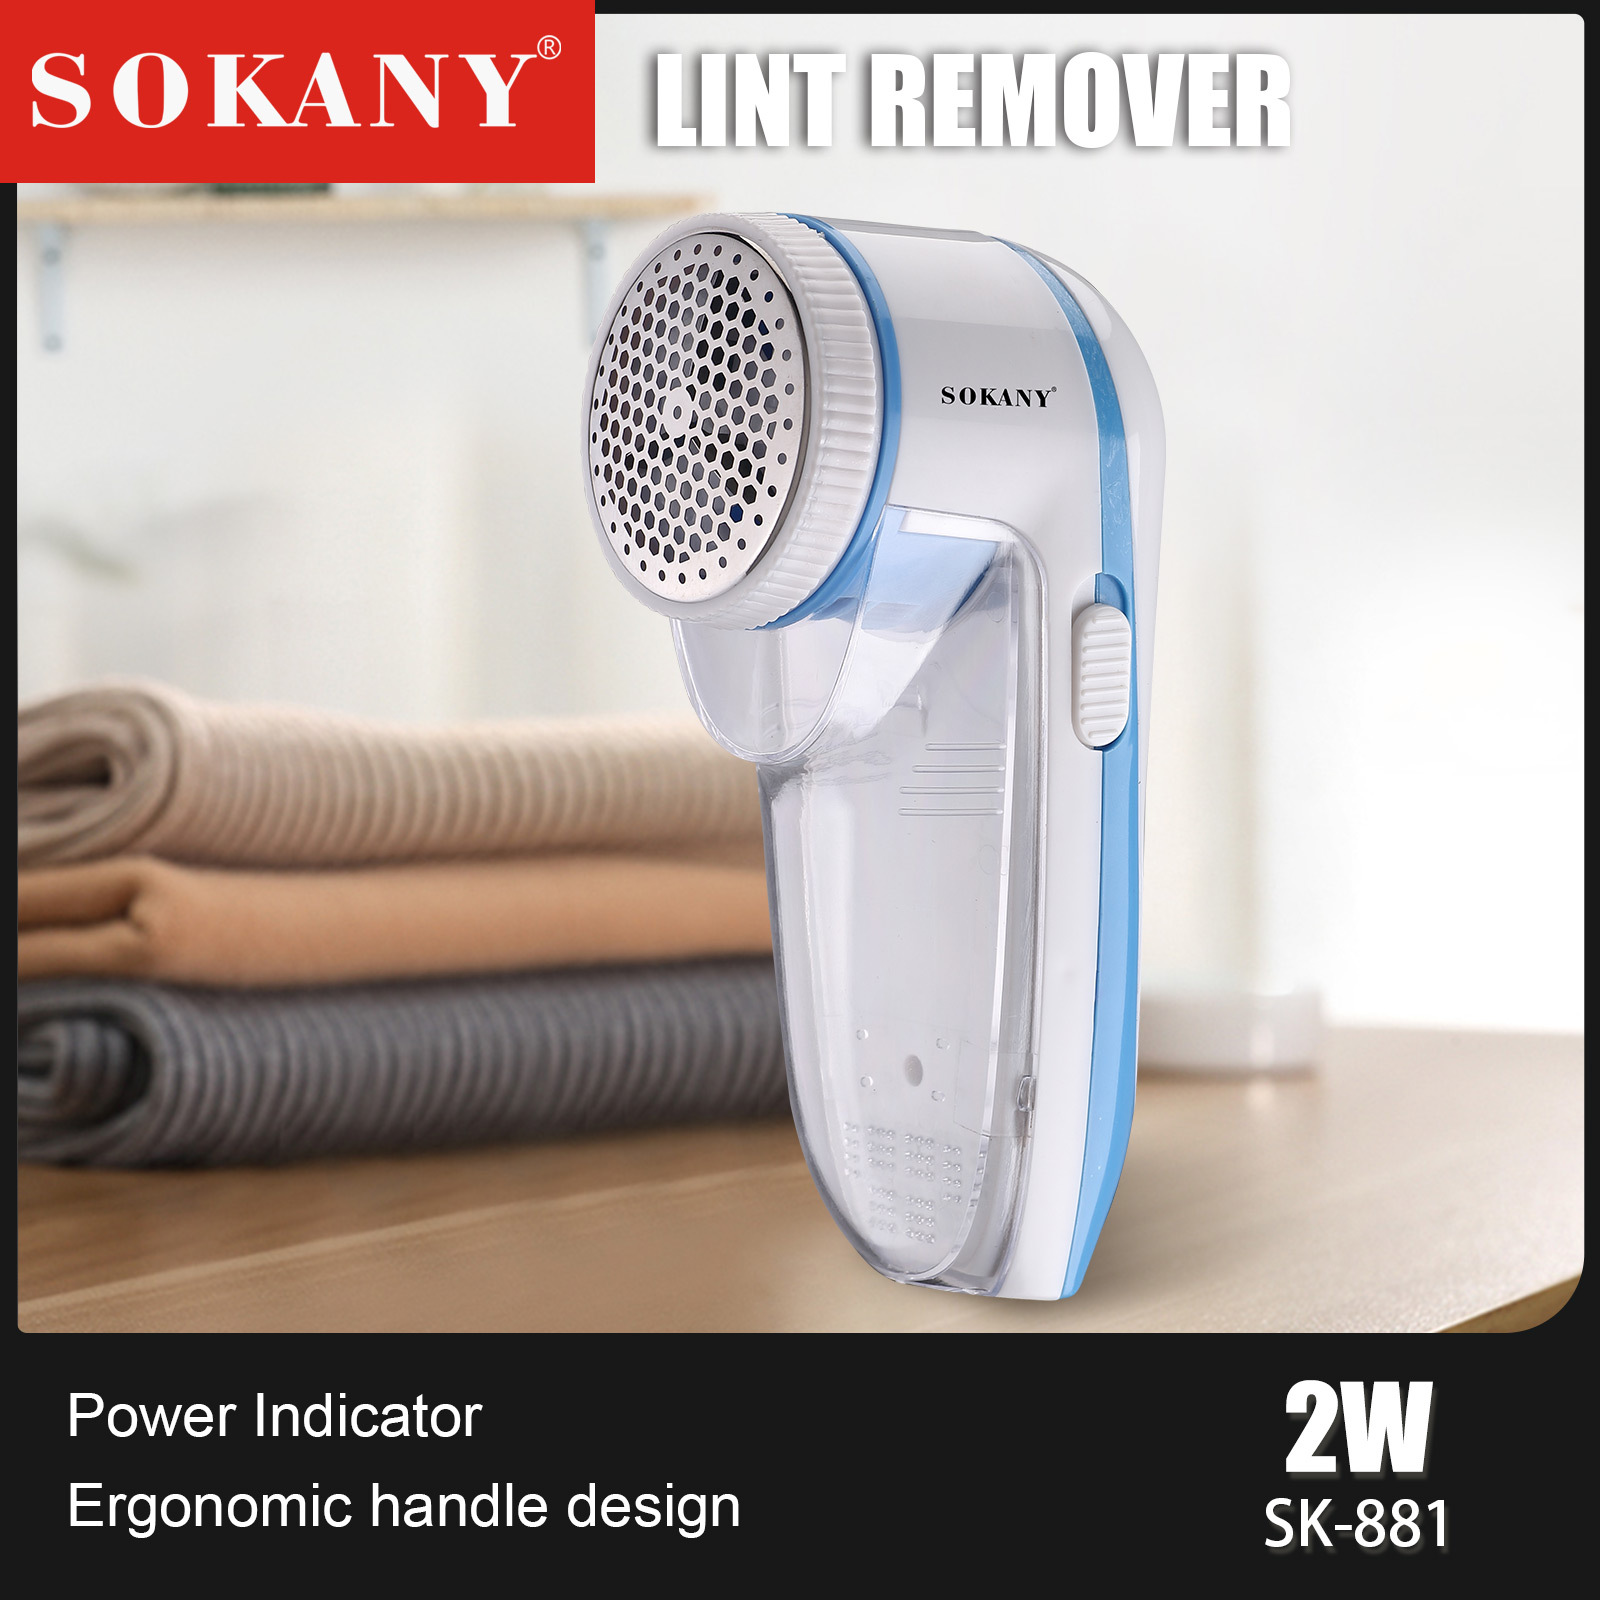 SOKANY 881 Hairball Trimmer Clothes Defur Remover USB Rechargeable Shaving Device